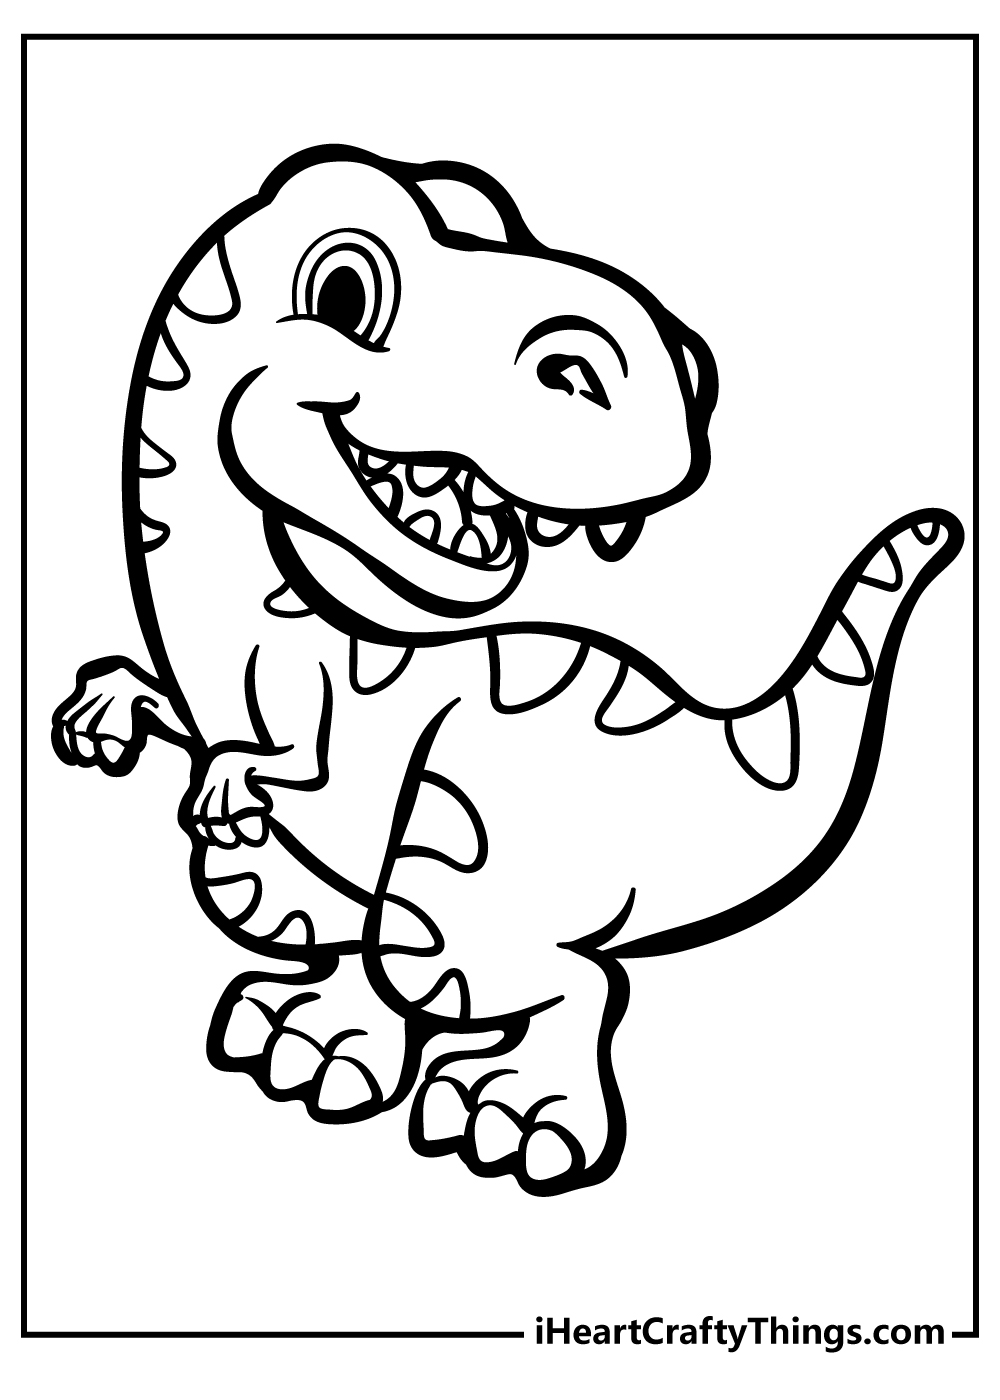 Printable Baby Dinosaur Coloring Pages Updated 20